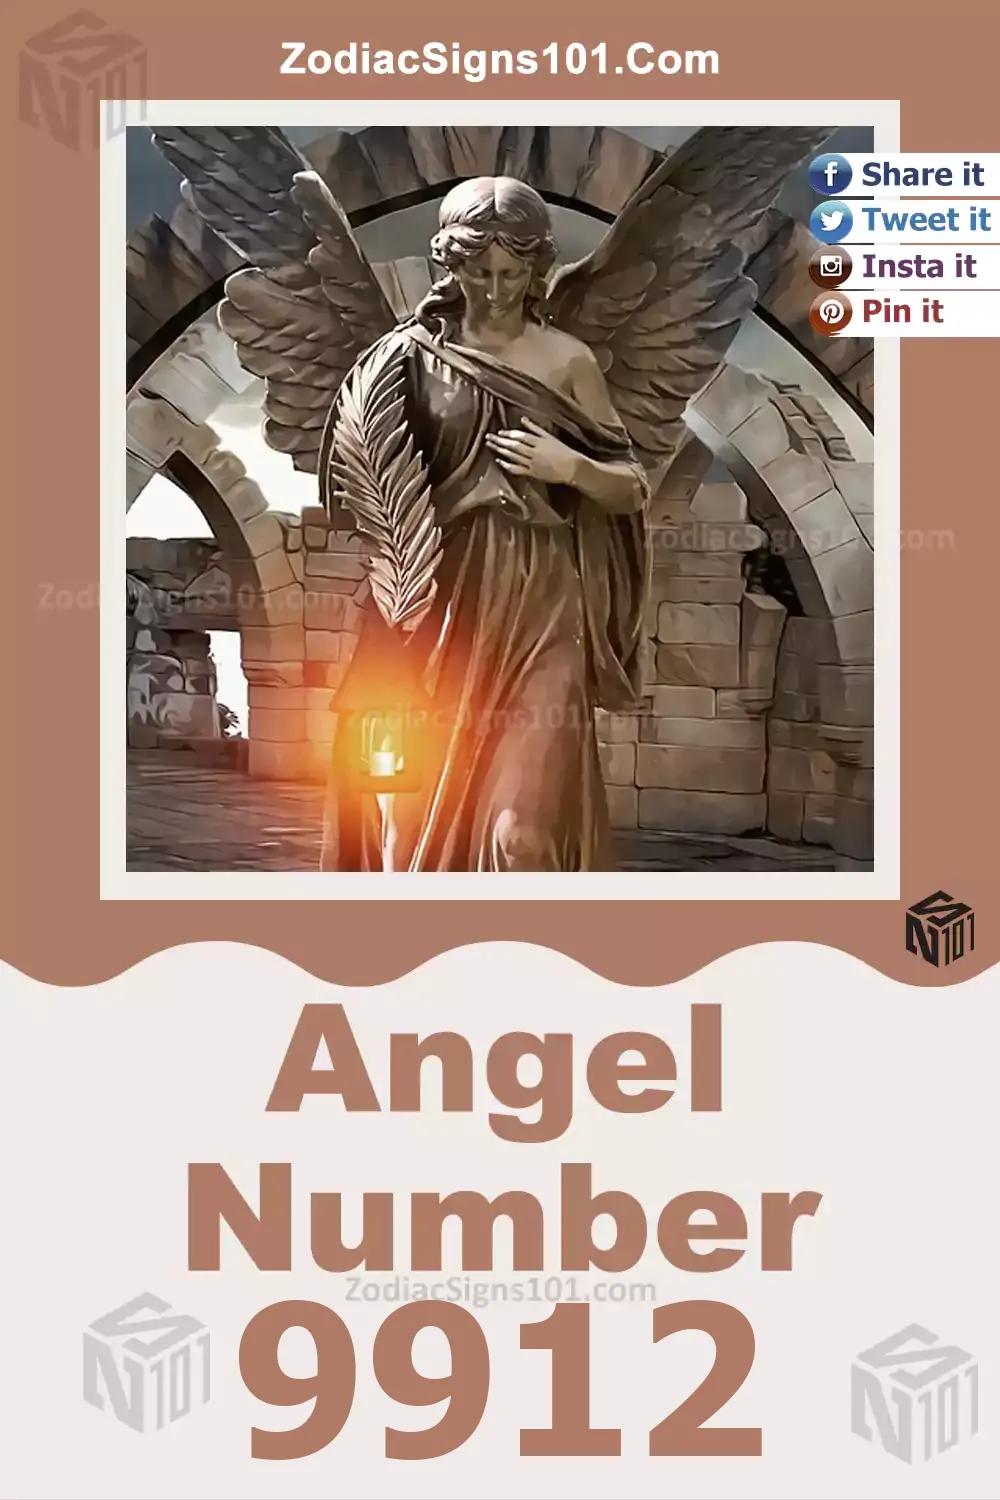 9912 Angel Number Meaning